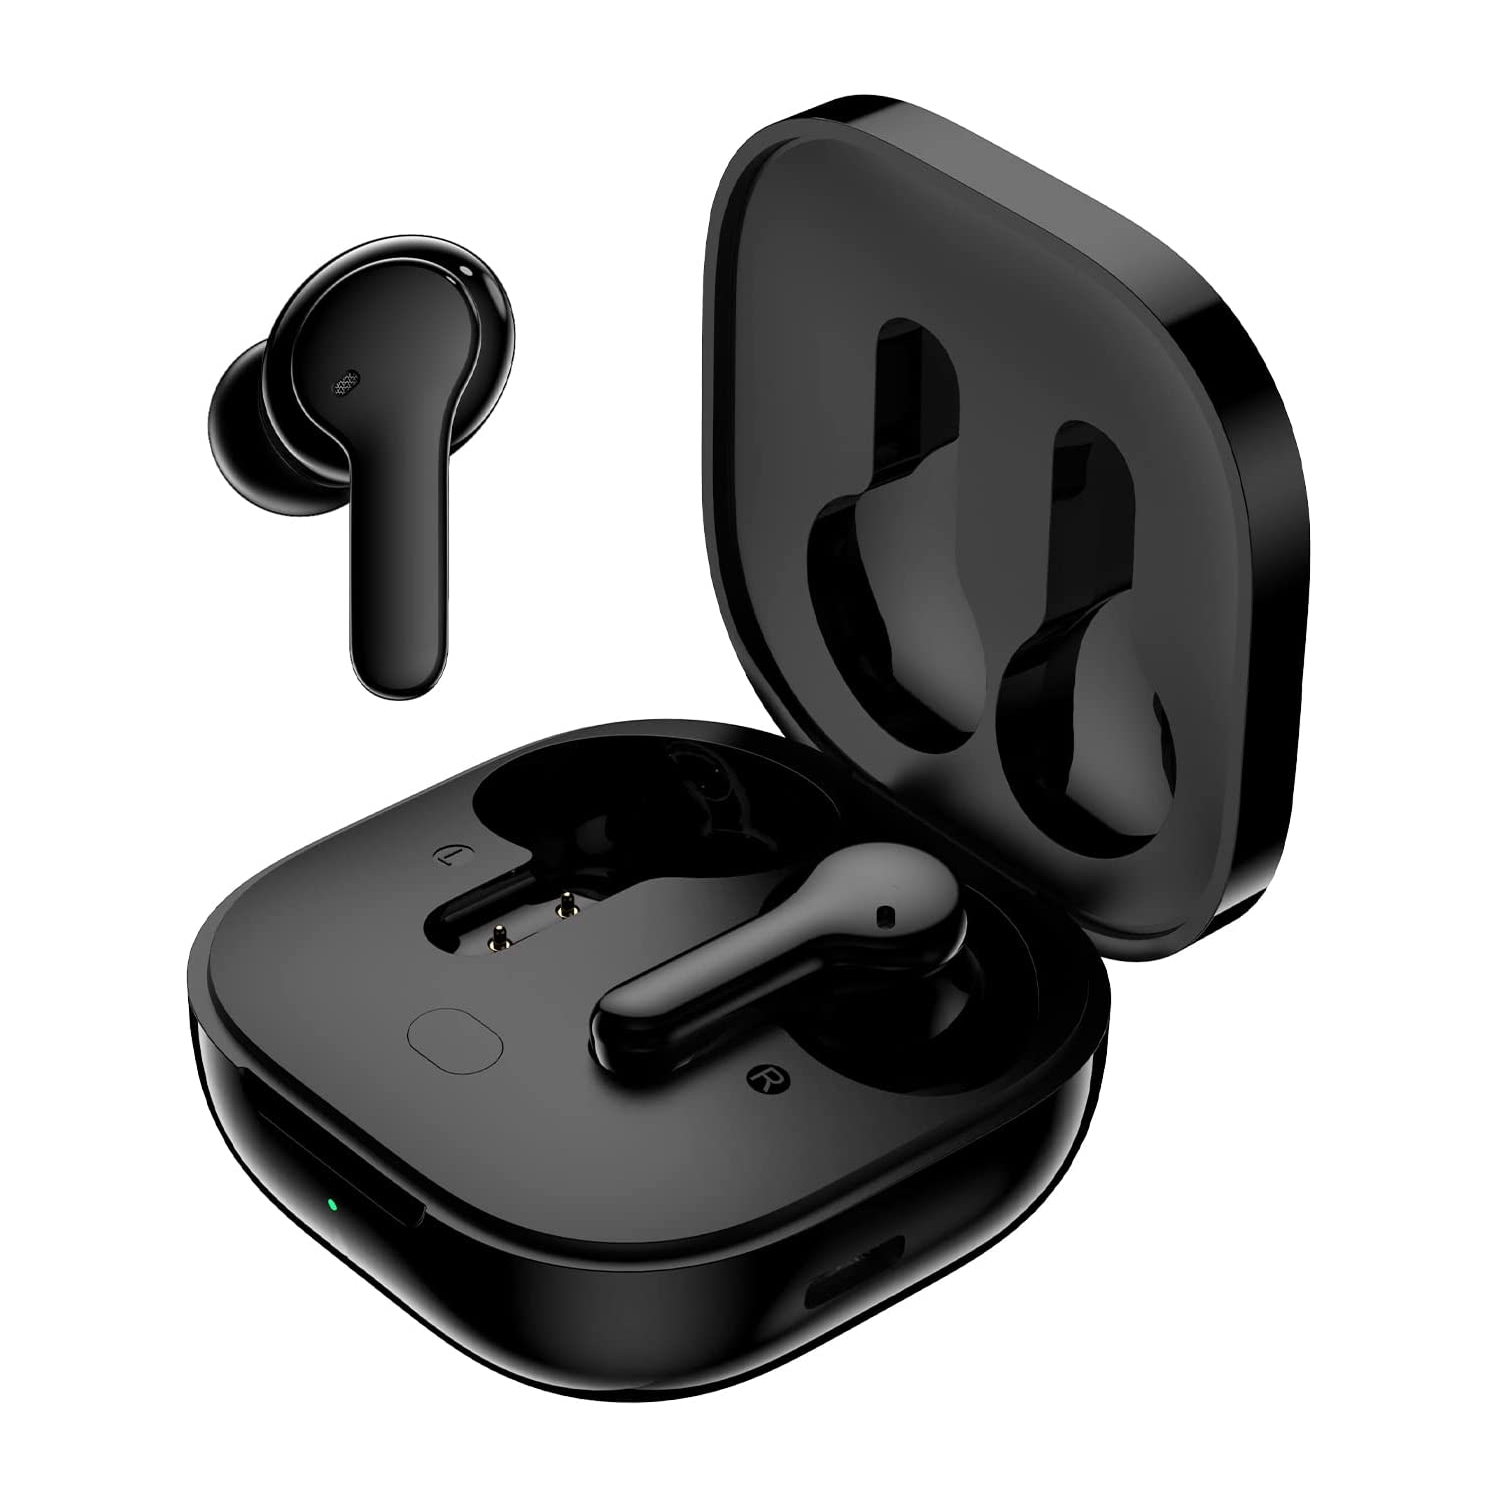 Dolaer Wireless Earbuds, T13 Bluetooth Earphones with Microphone ENC Noise Cancelling Ear Buds USB C Headphones 40H Playtime IPX5 Waterproof Headset for iPhone Andriod, Black